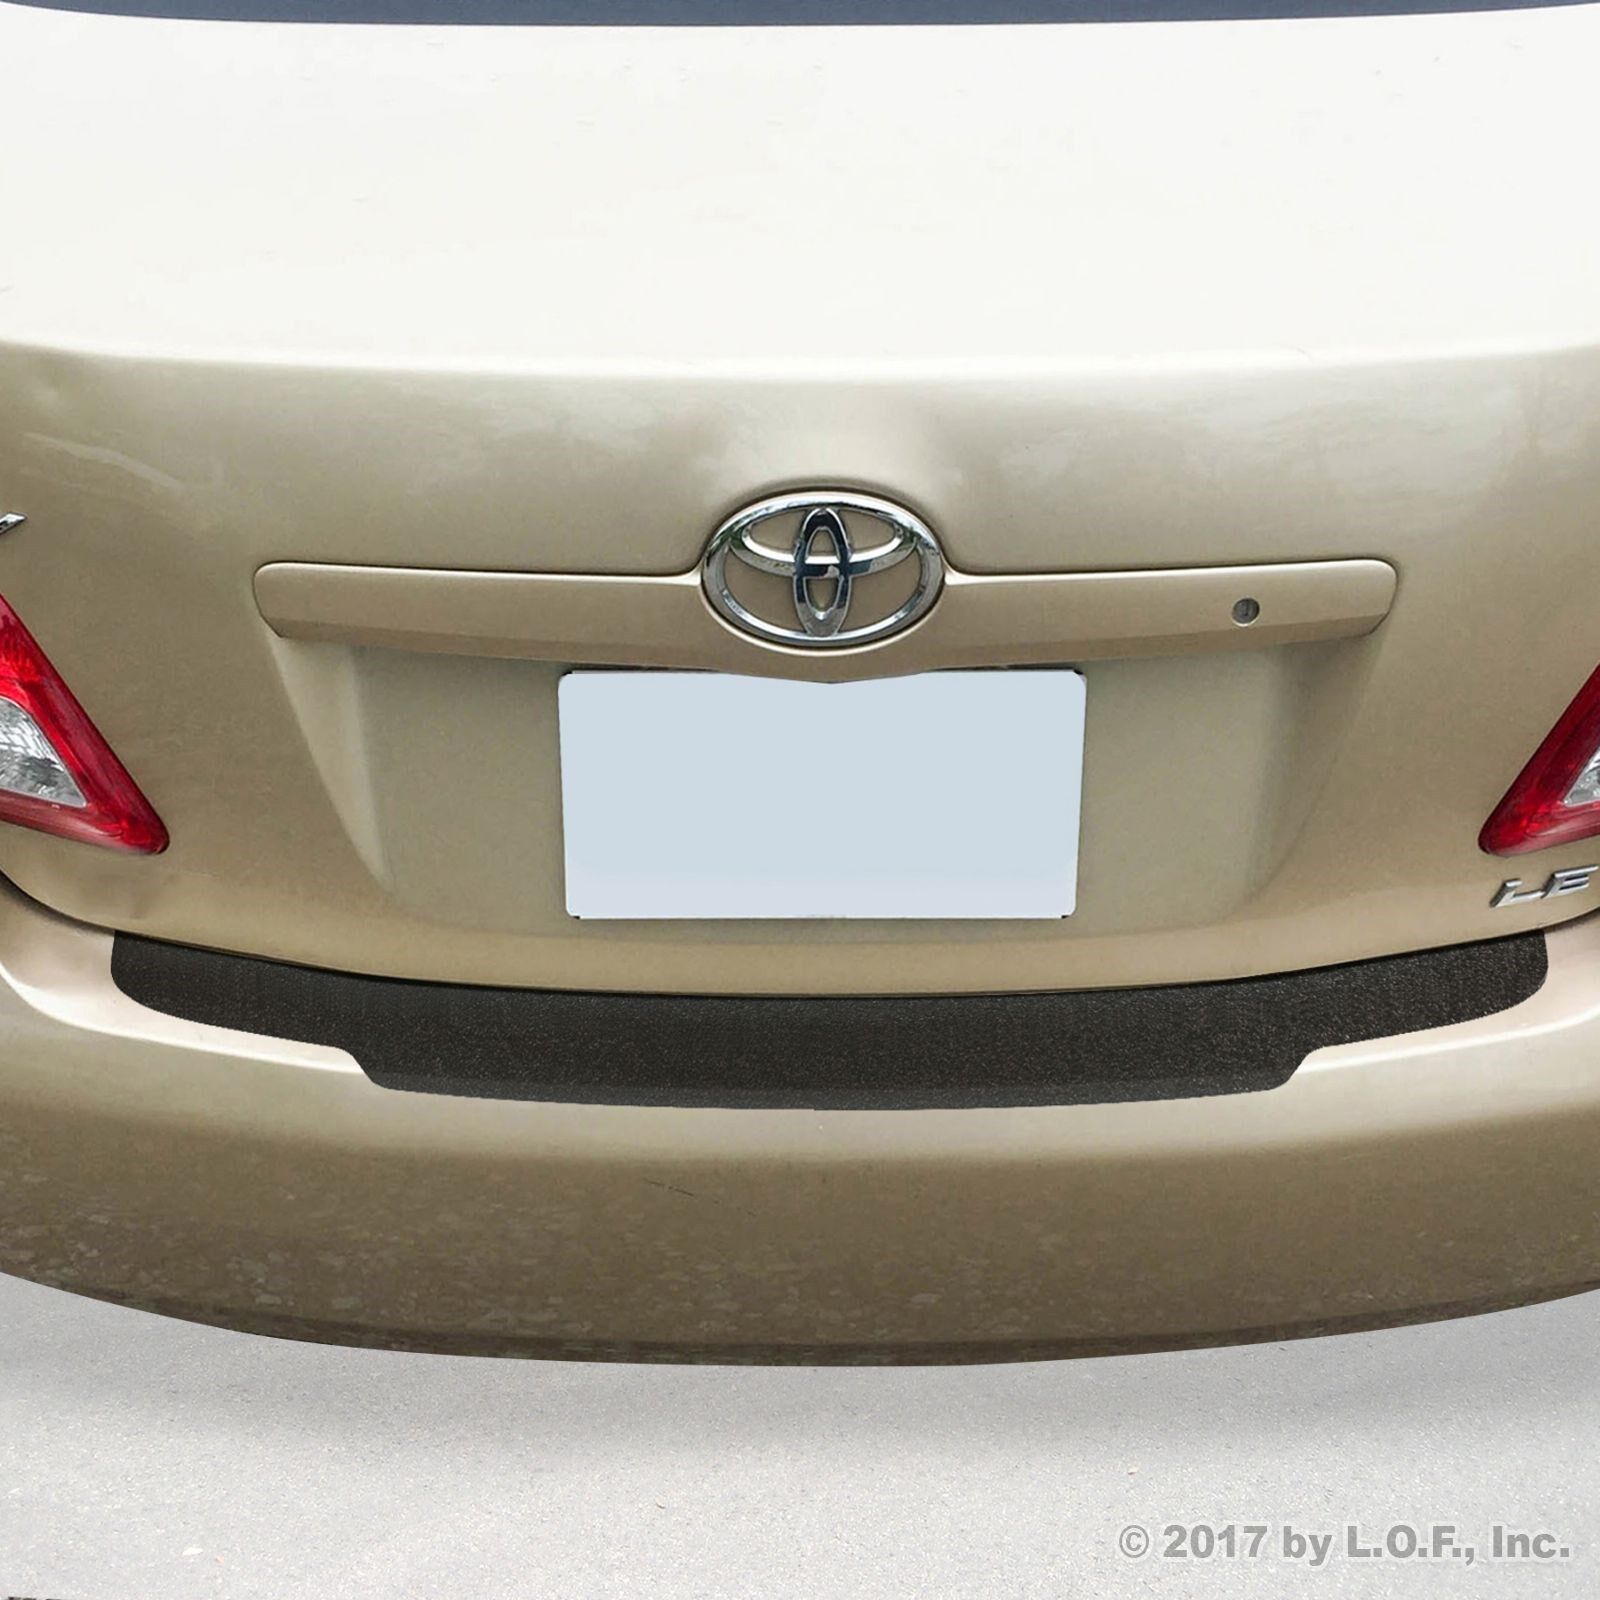 2007-11 fits Toyota Camry 1pc Rear Bumper Applique Scratch Guard Protector Cover